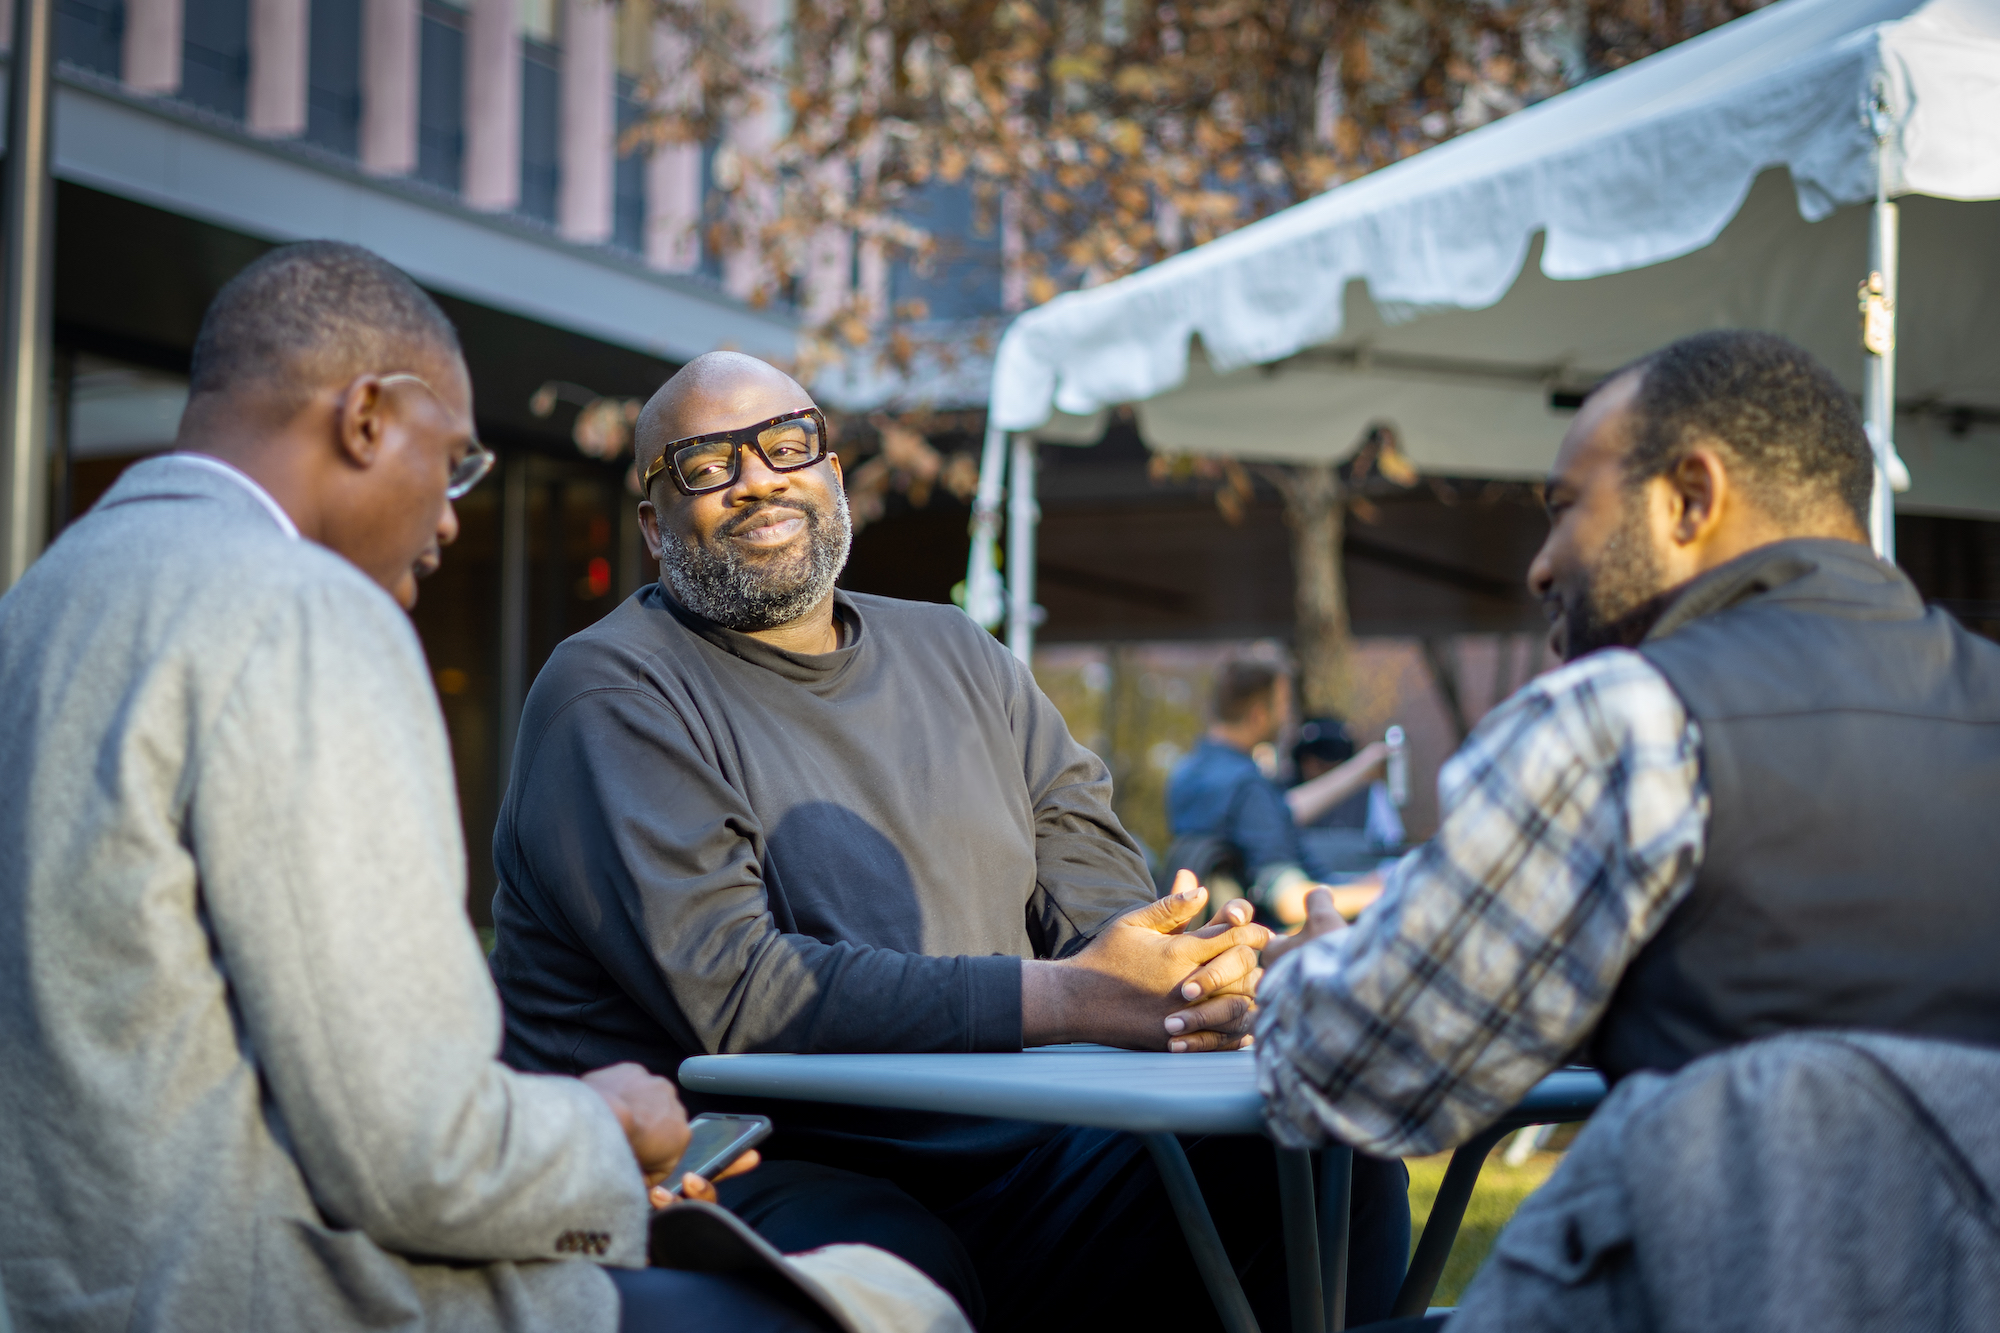 George Greenidge, seated at a table, outside, talking with students Darold Cuba (right) MC/MPA ‘21 and community member like Kalu K. Ugwuomo, Jr. (left) Co-founder and Managing Partner at Kalgomex Ventures